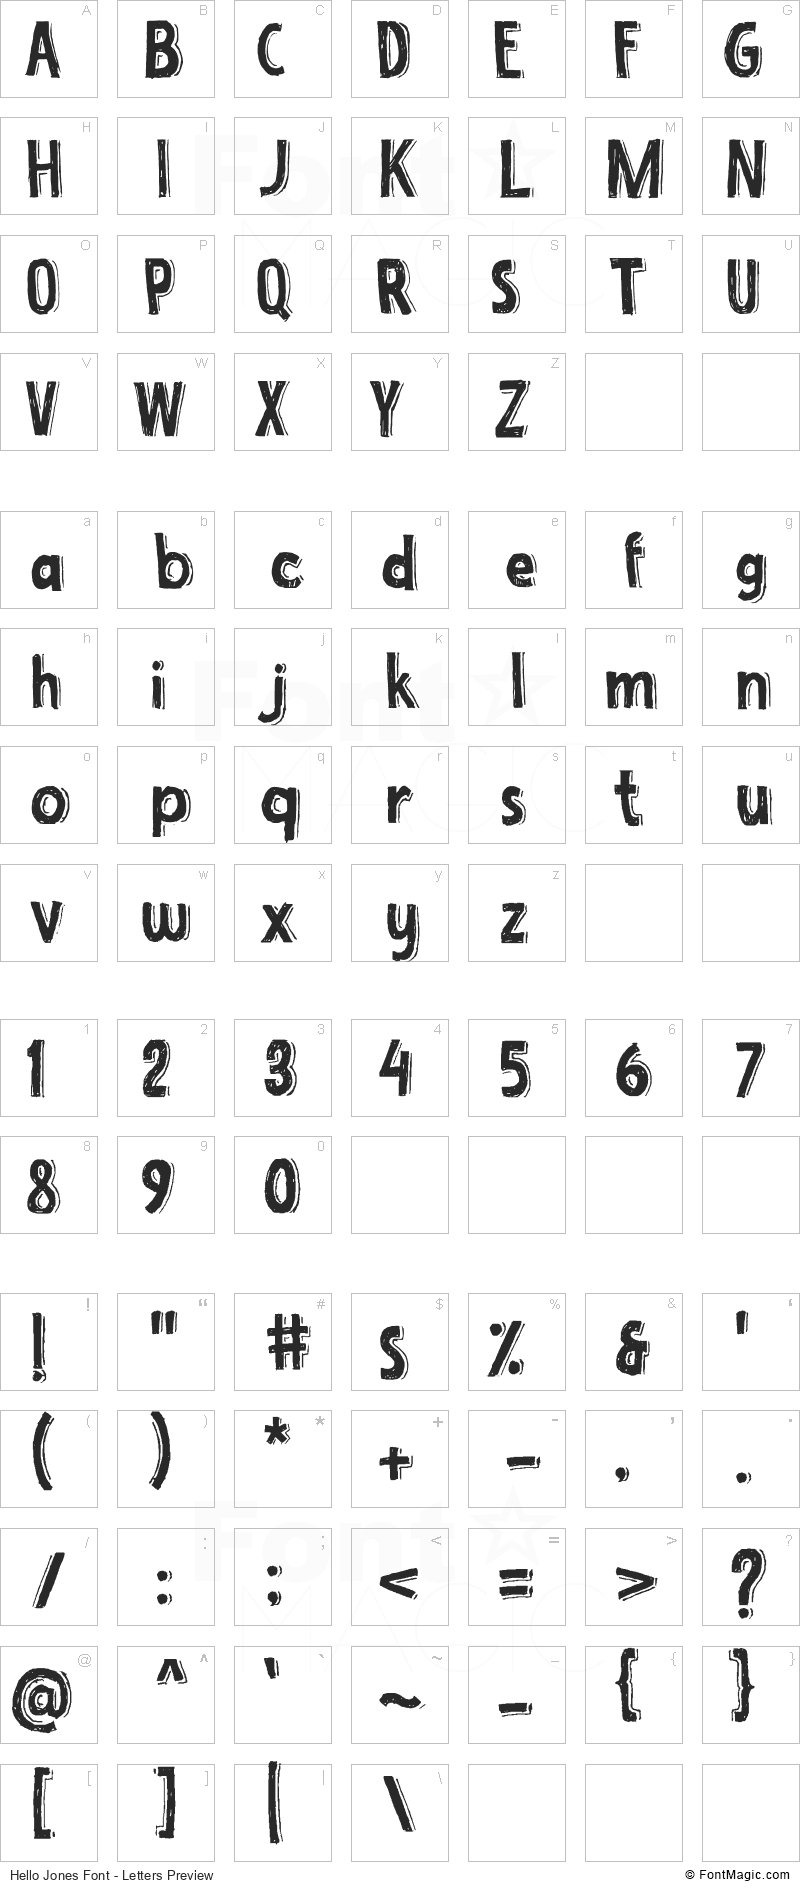 Hello Jones Font - All Latters Preview Chart